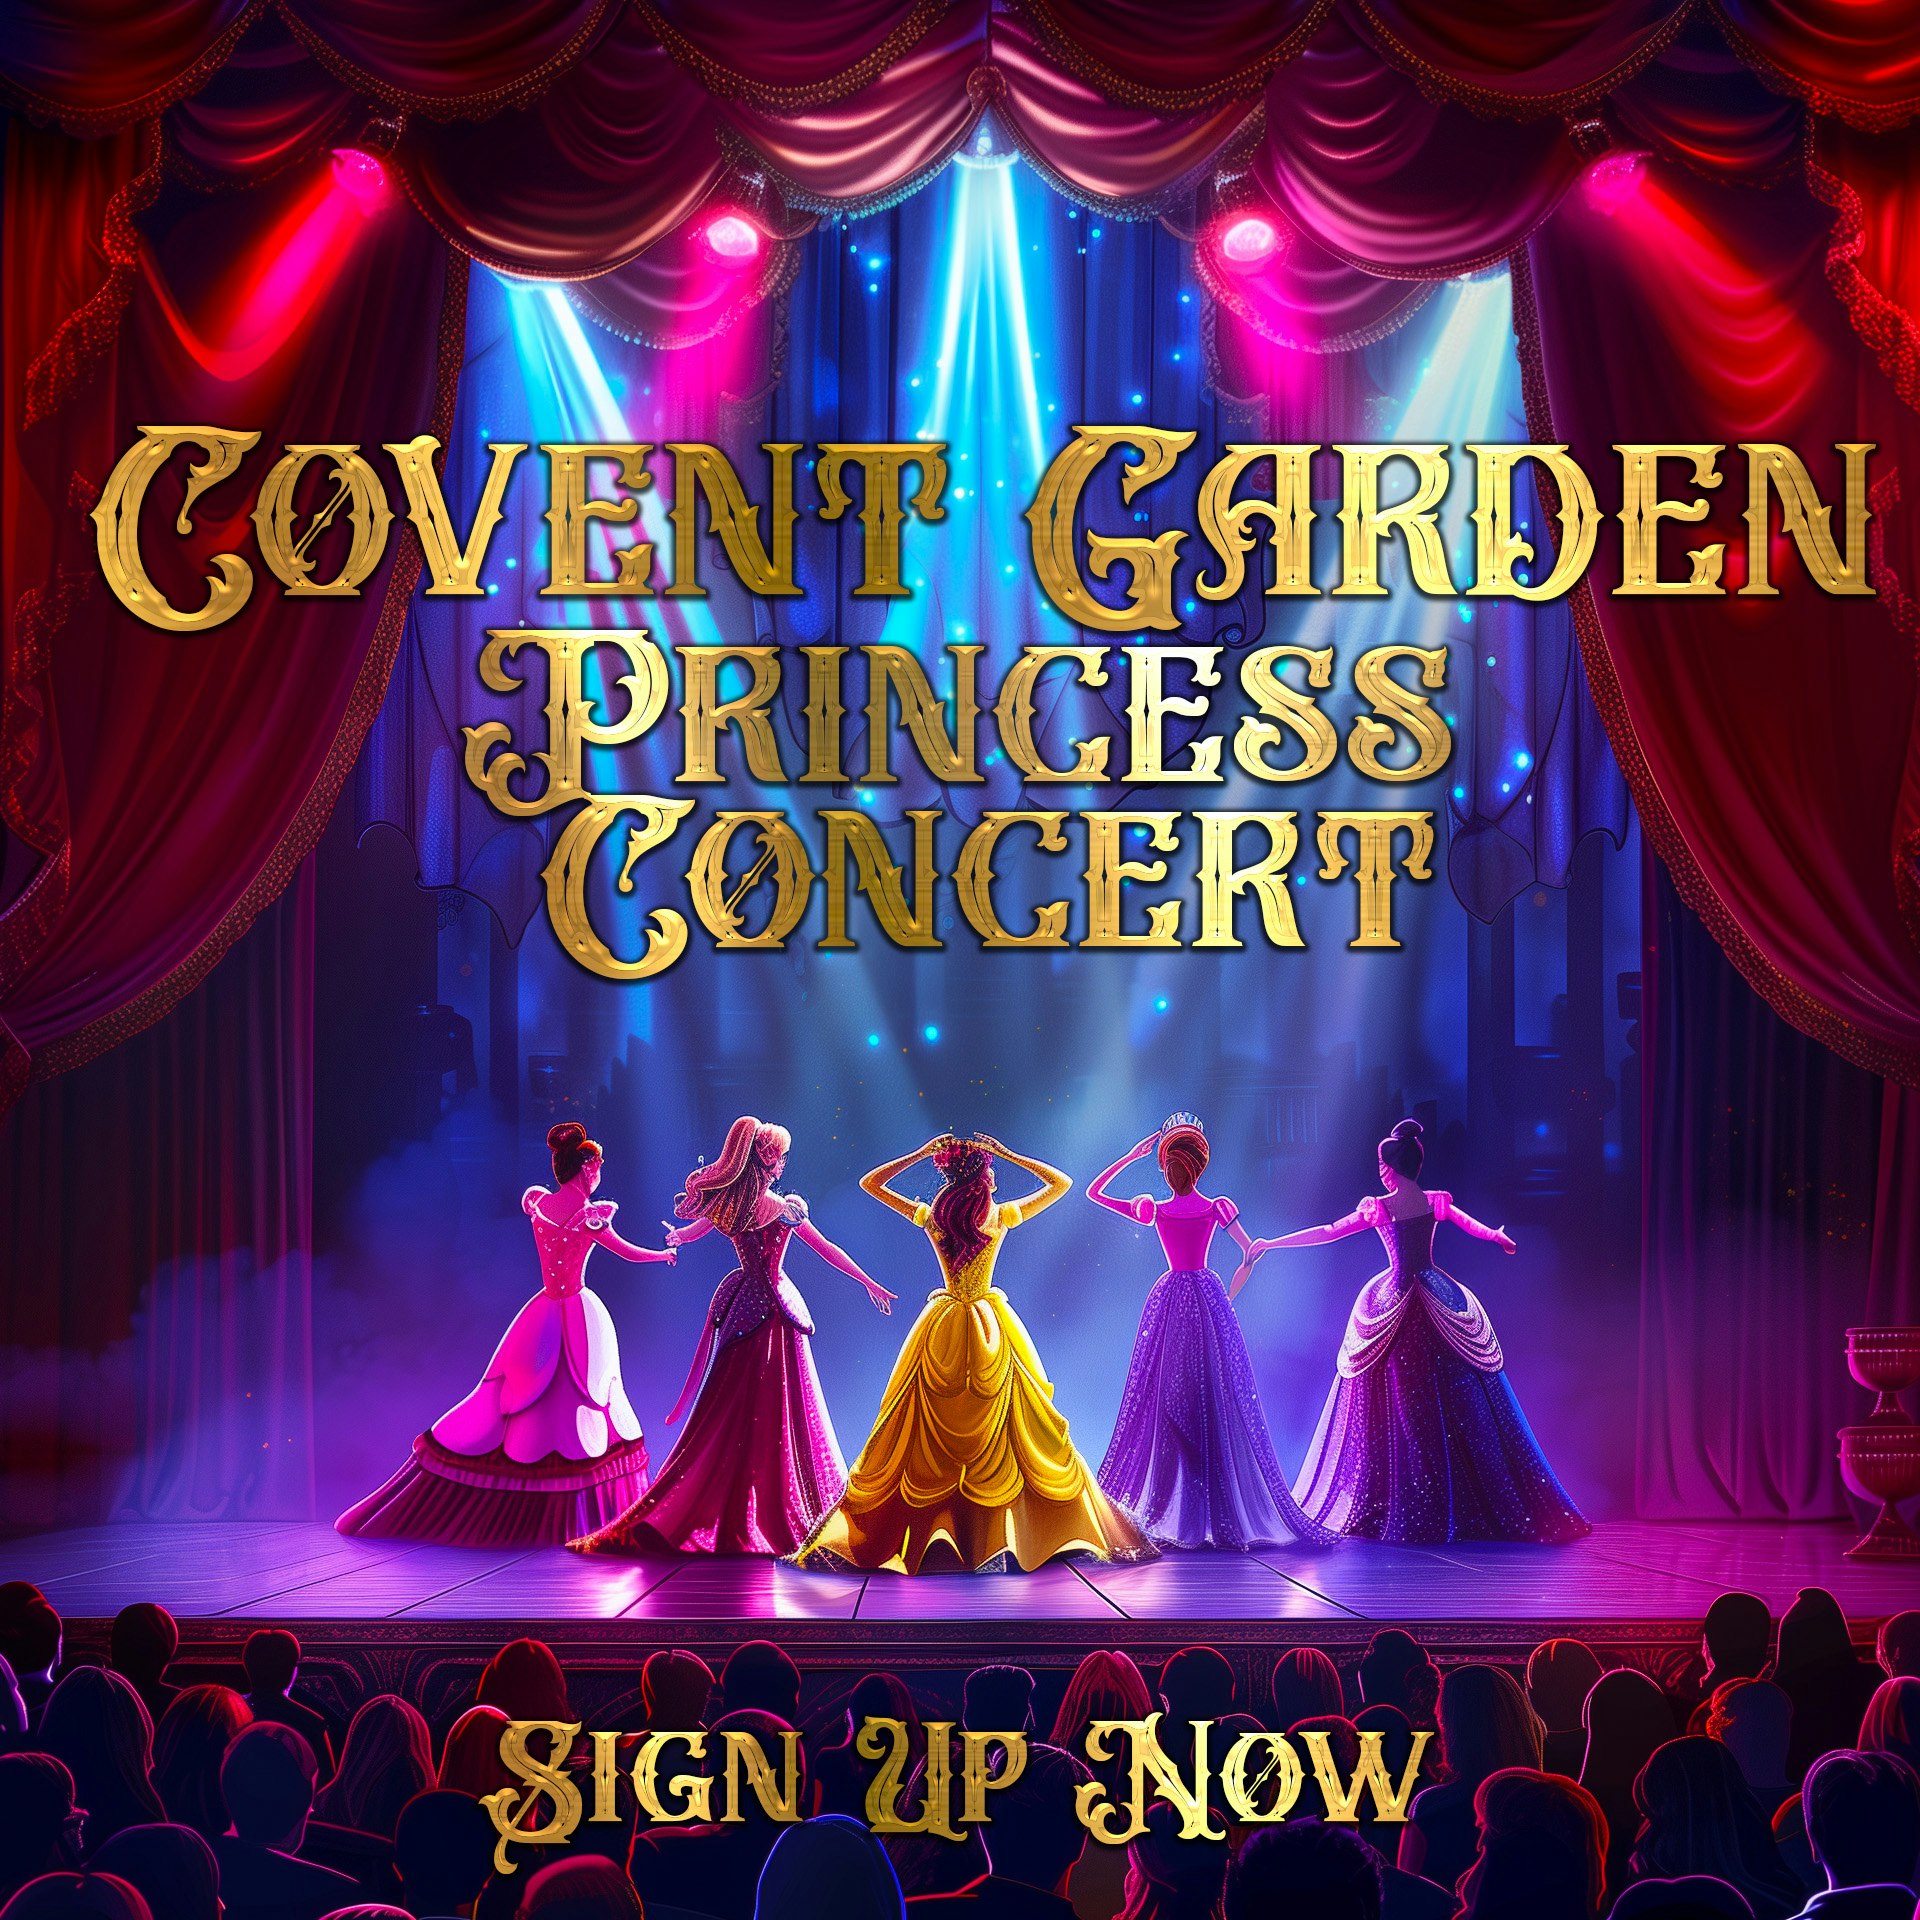 The Princess Concert Comes To Covent Garden London ✨👑